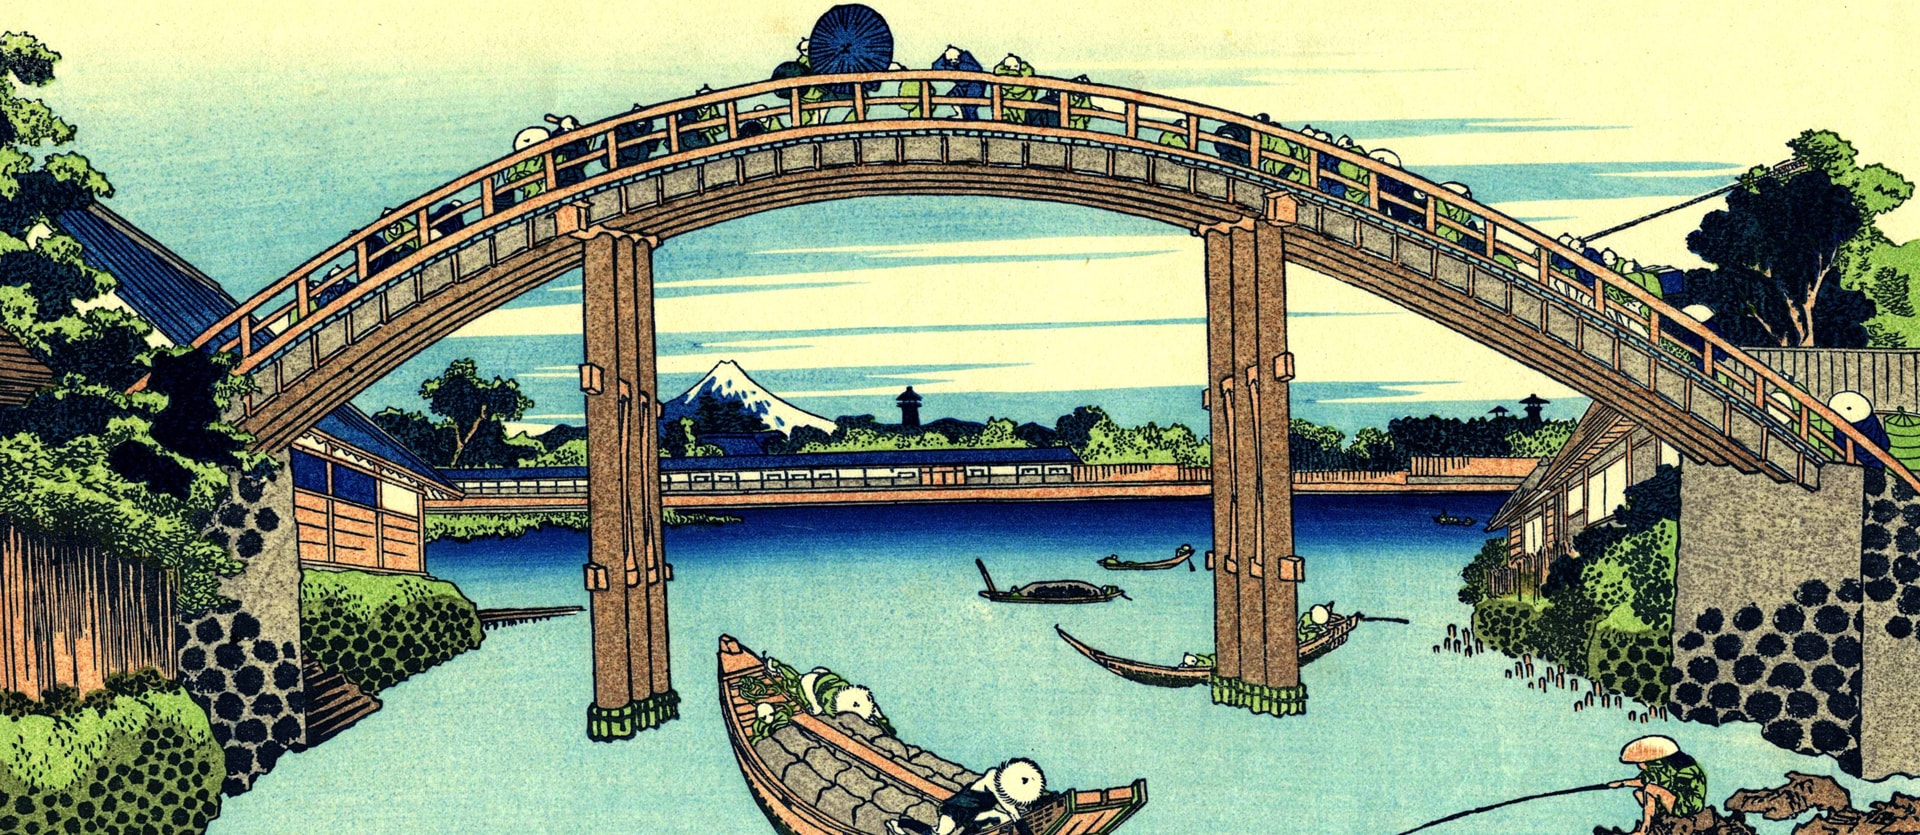 As a Japanese SEO Specialist, I will build a bridge for your business to reach more potential customers in Japan.